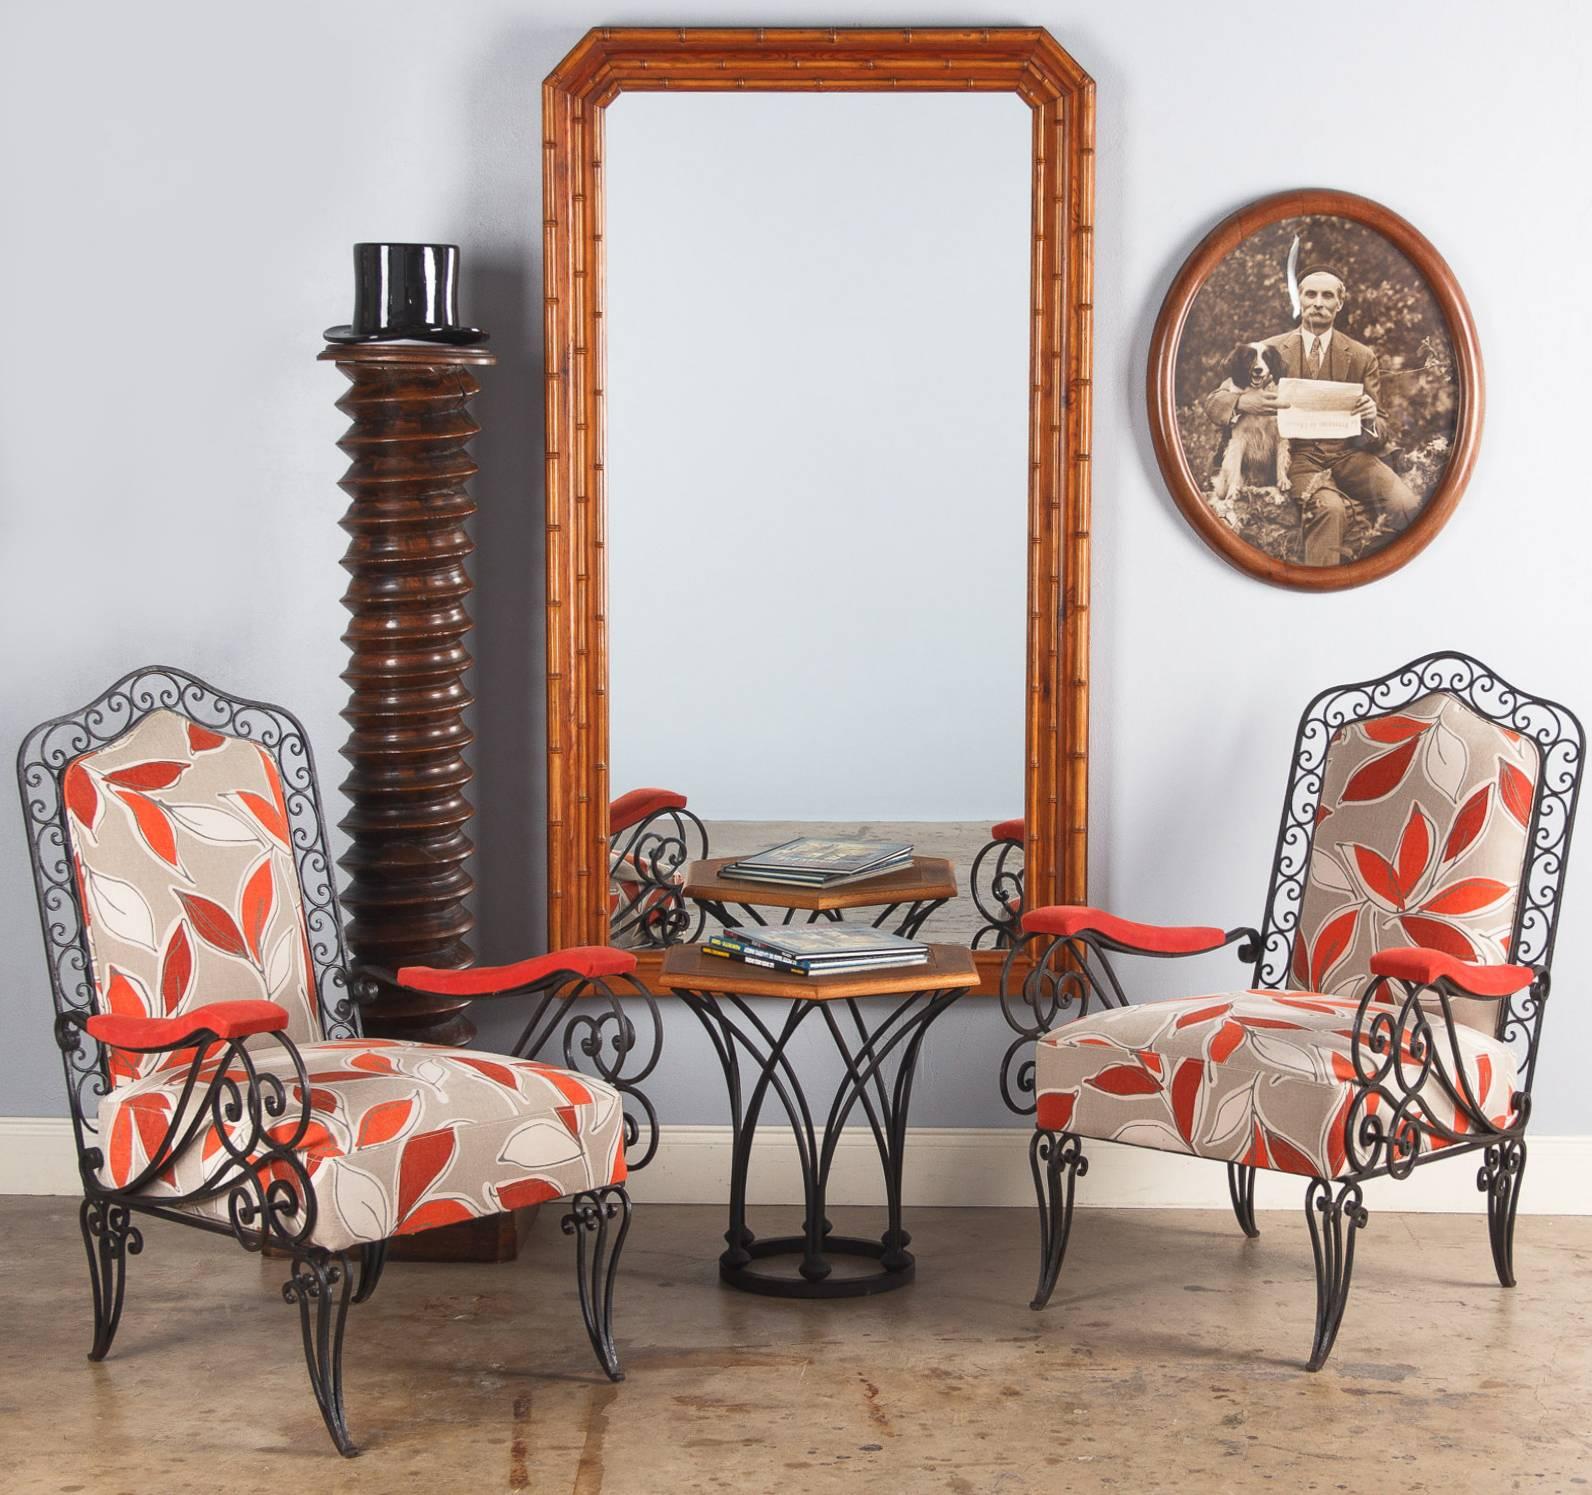 A great pair of French 1940s wrought iron armchairs that were recently re-upholstered with a colorful fabric featuring leaf motifs in light grey, red, orange and coral tones. The black iron frames are all scrolled. The seats are firm and